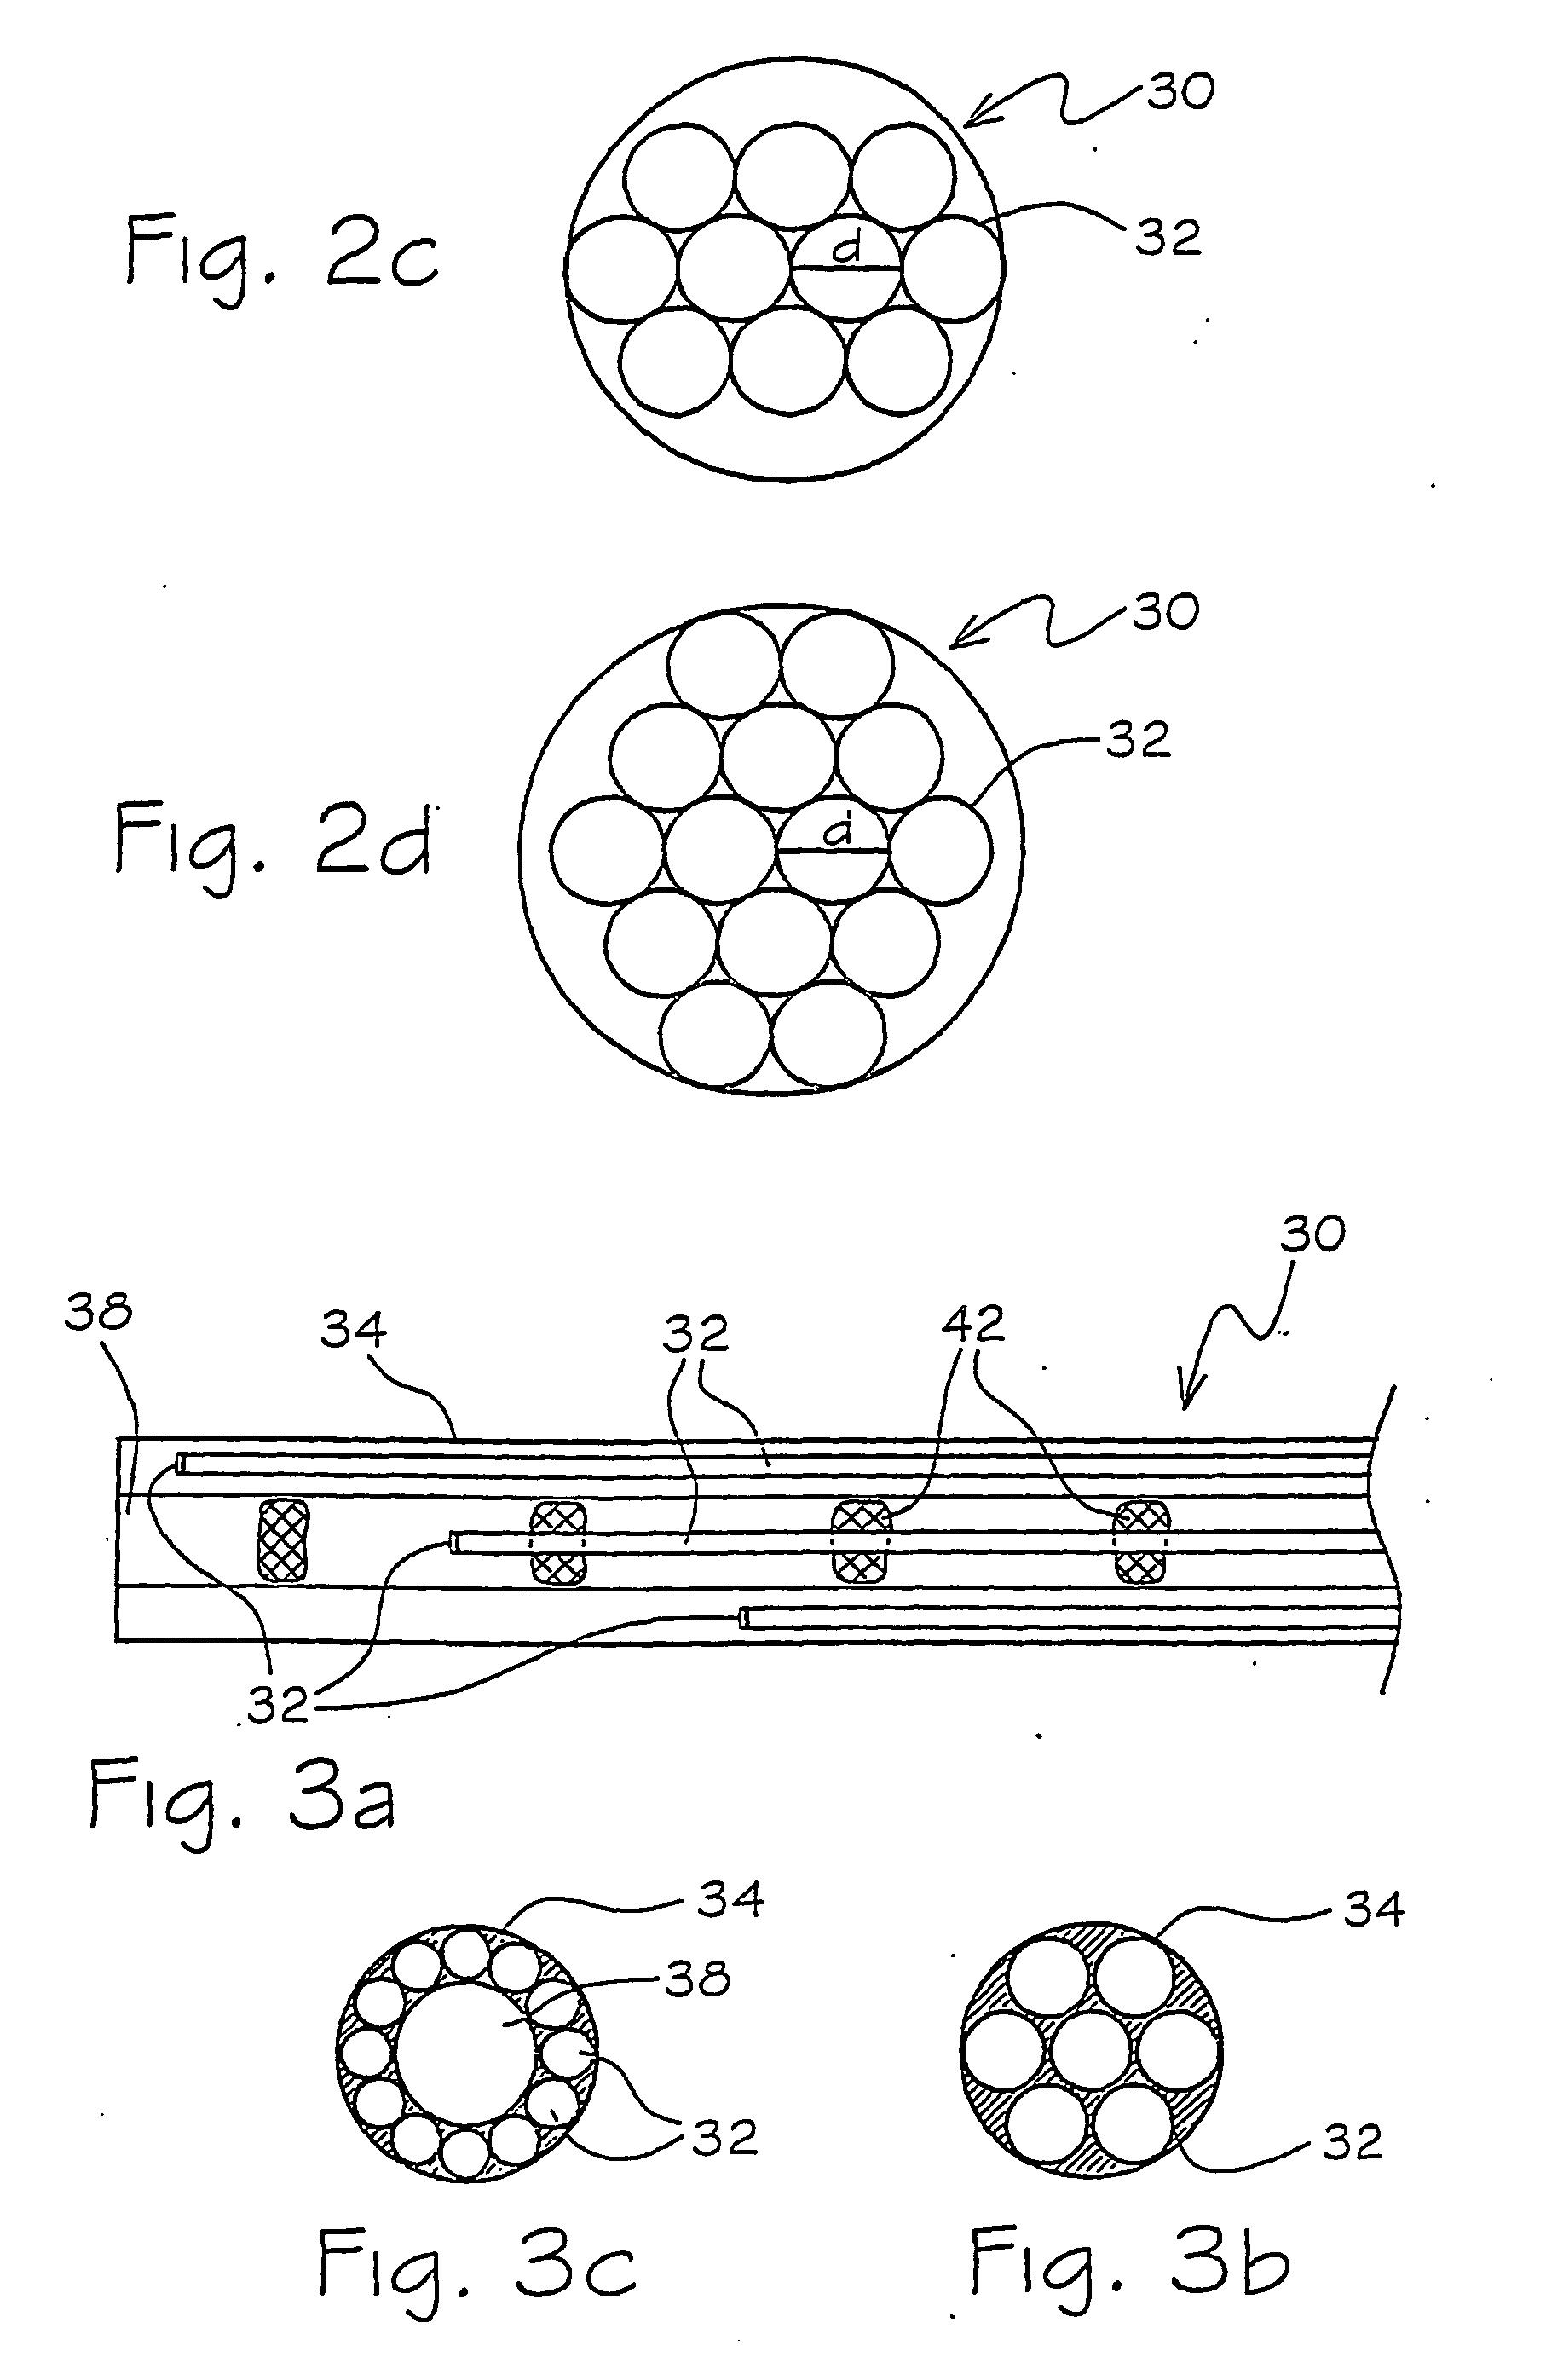 Ultrasonic probing device with distributed sensing elements